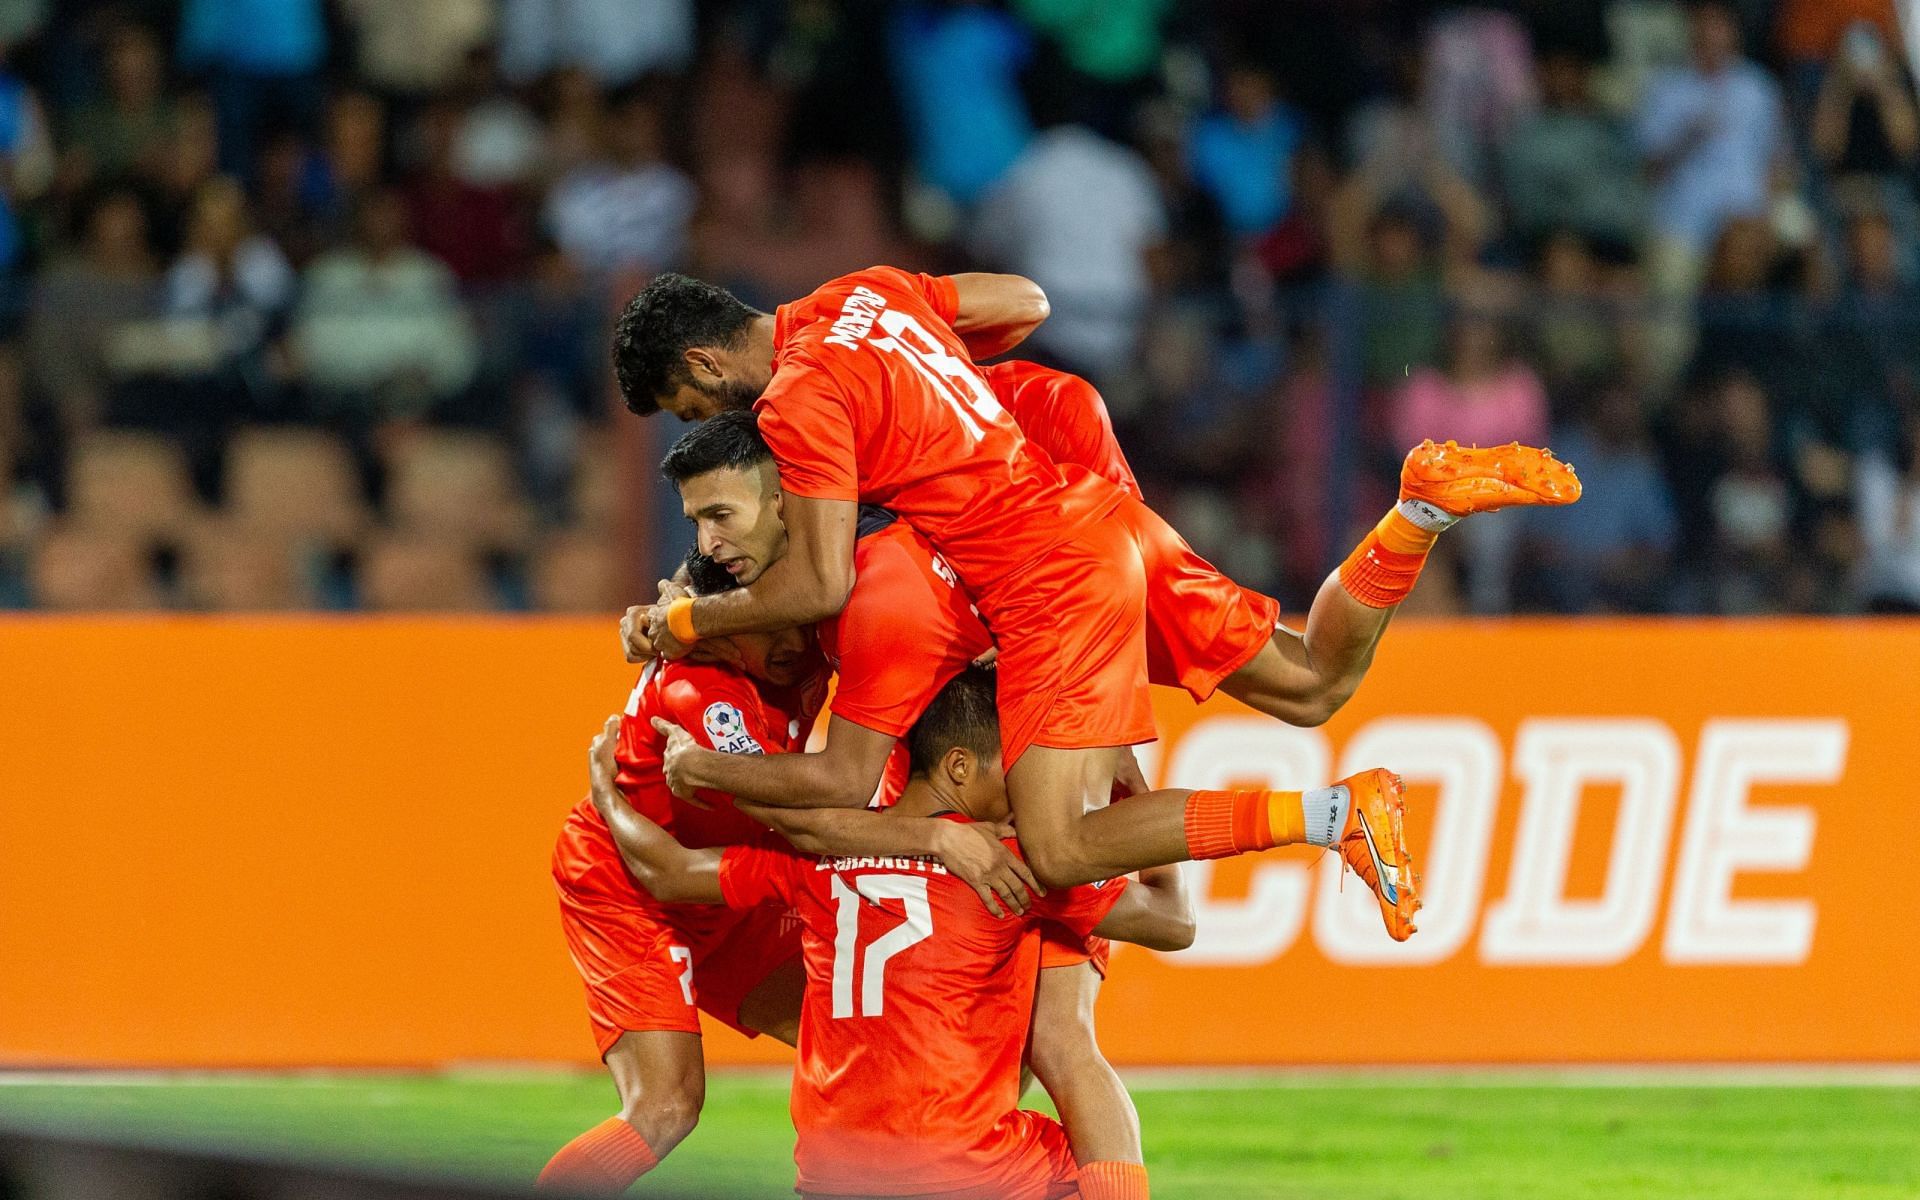 India showed great character to come from behind and win the tie (Image courtesy: AIFF Media)